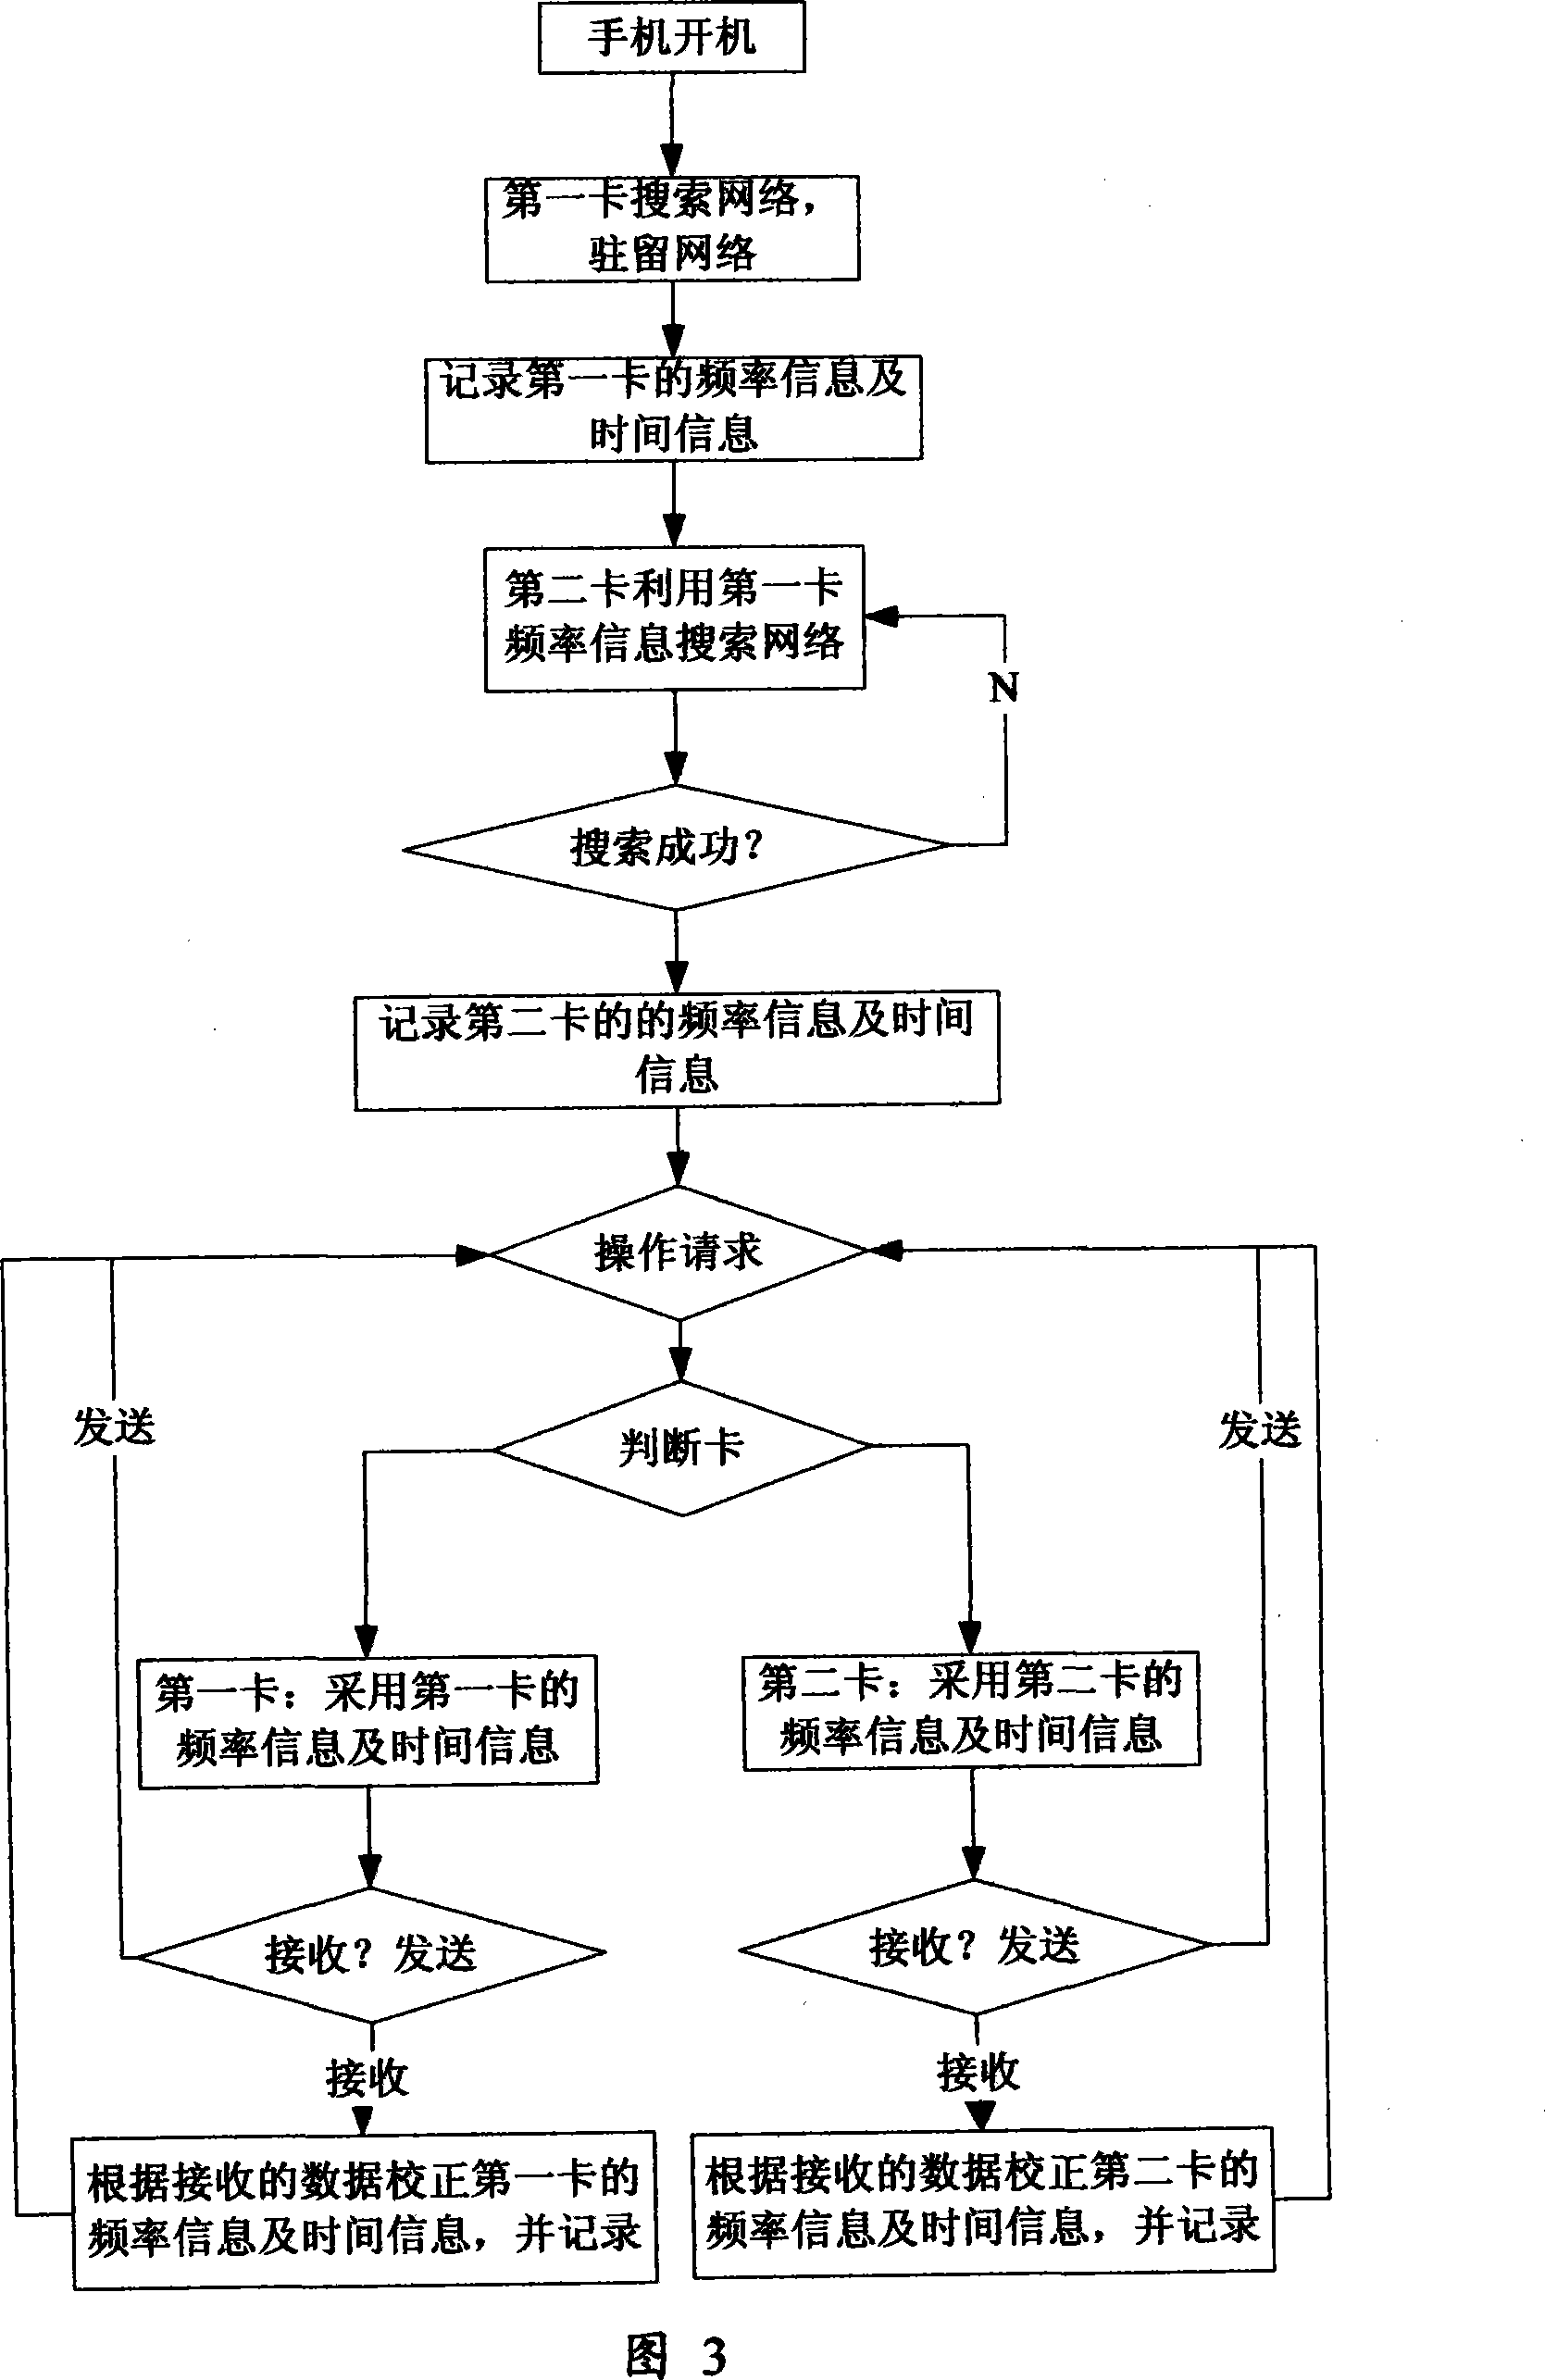 A single-baseband single radio frequency dual-card dual-standby communication terminal and the corresponding communication method